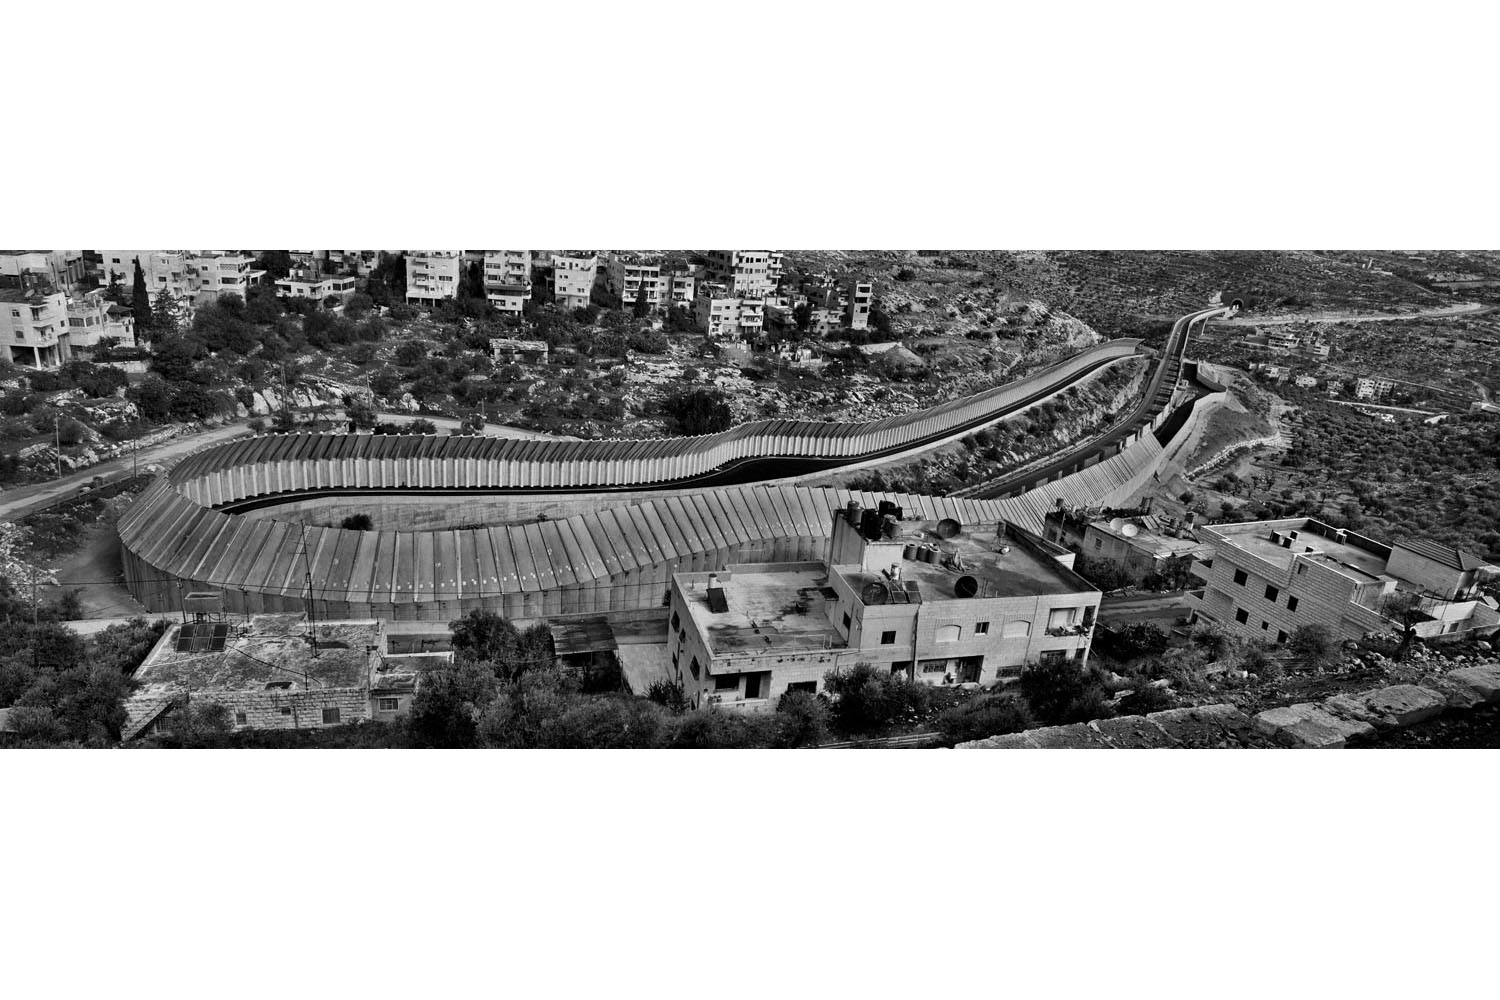 Route 60, Beit Jala, Bethlehem area. Specially designed concrete slabs were incorporated into the Wall along major transport routes such as Road 60 to prevent potential attacks (2011). From Wall, Photographs by Joself Koudelka (Aperture, 2013).